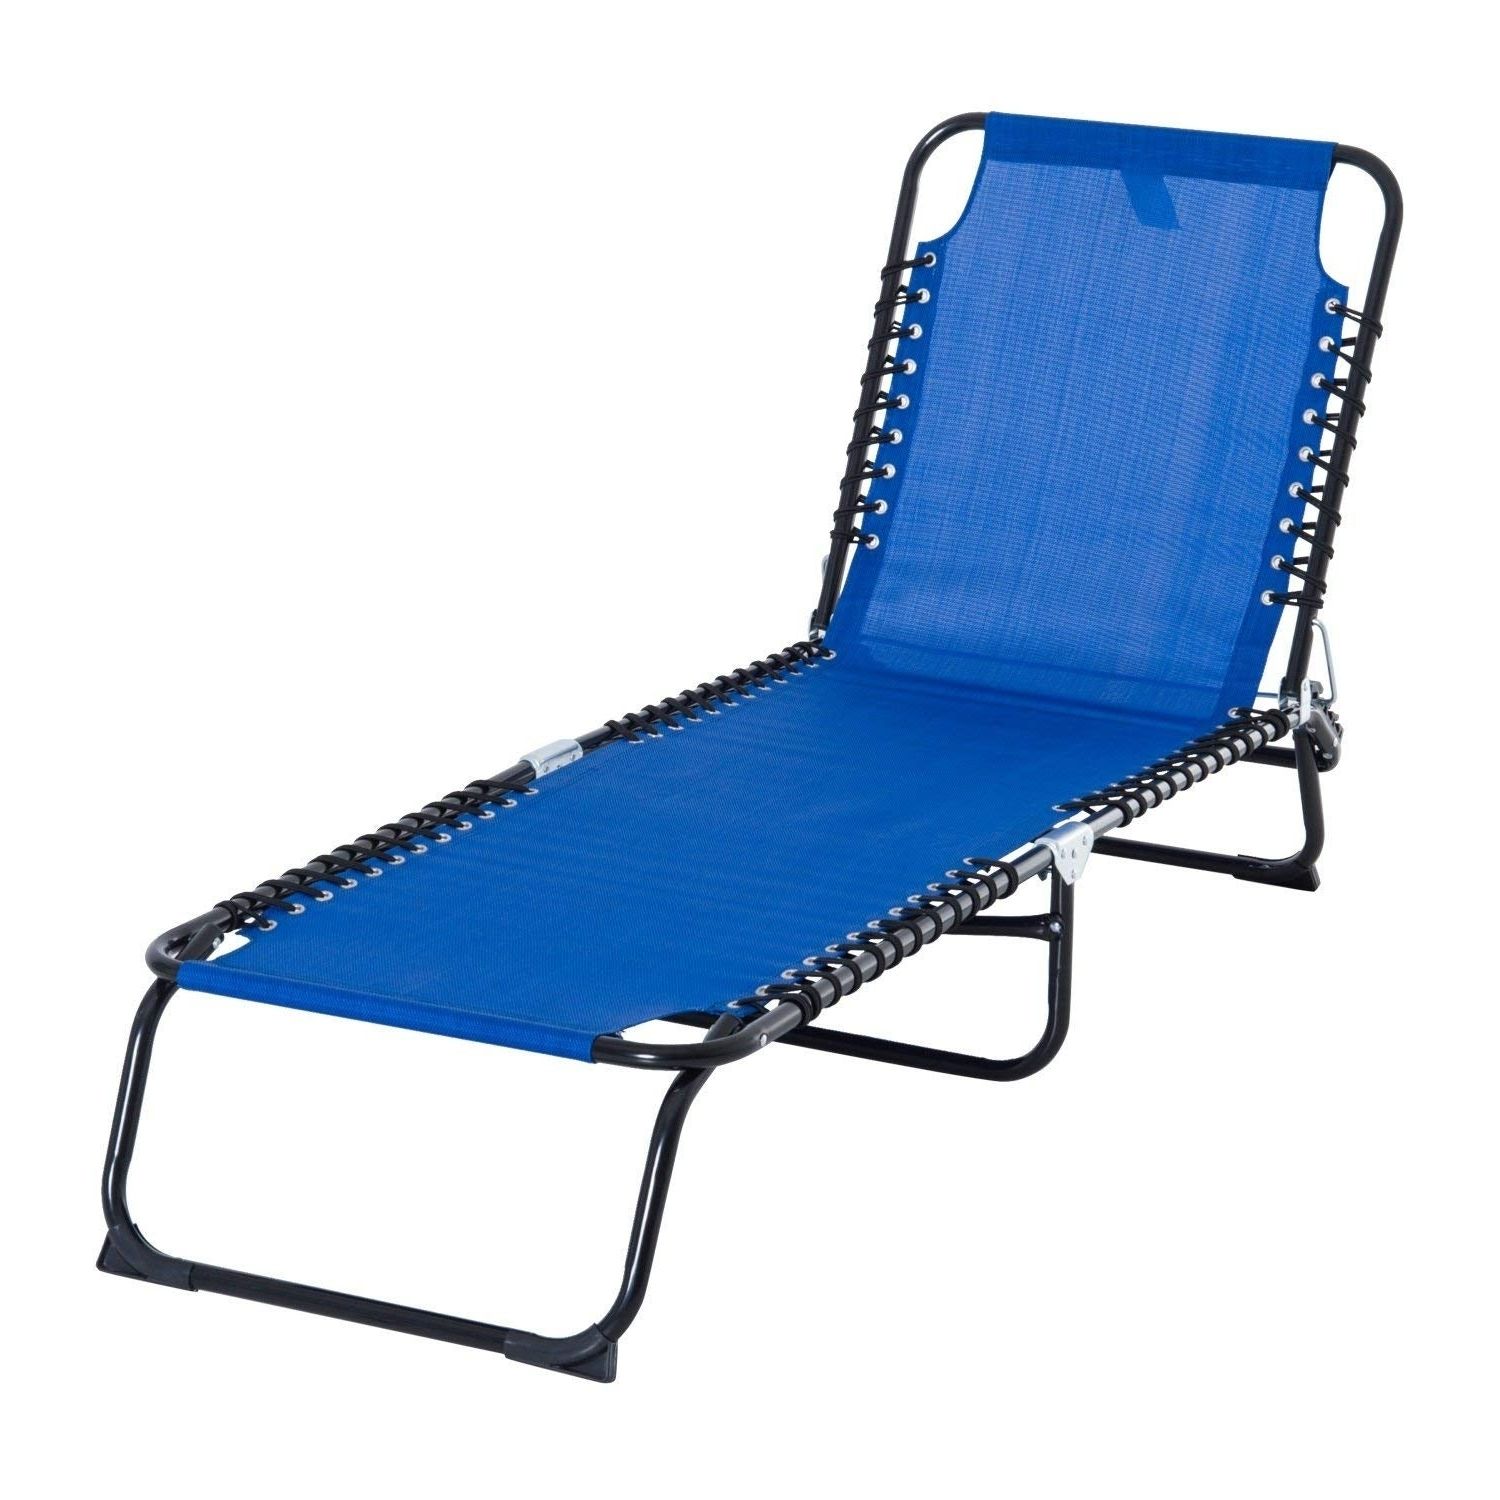 Portable Extendable Folding Reclining Chairs In Well Known Outsunny 3 Position Portable Reclining Beach Chaise Lounge Folding Chair  Outdoor Patio – Light Blue (View 5 of 25)